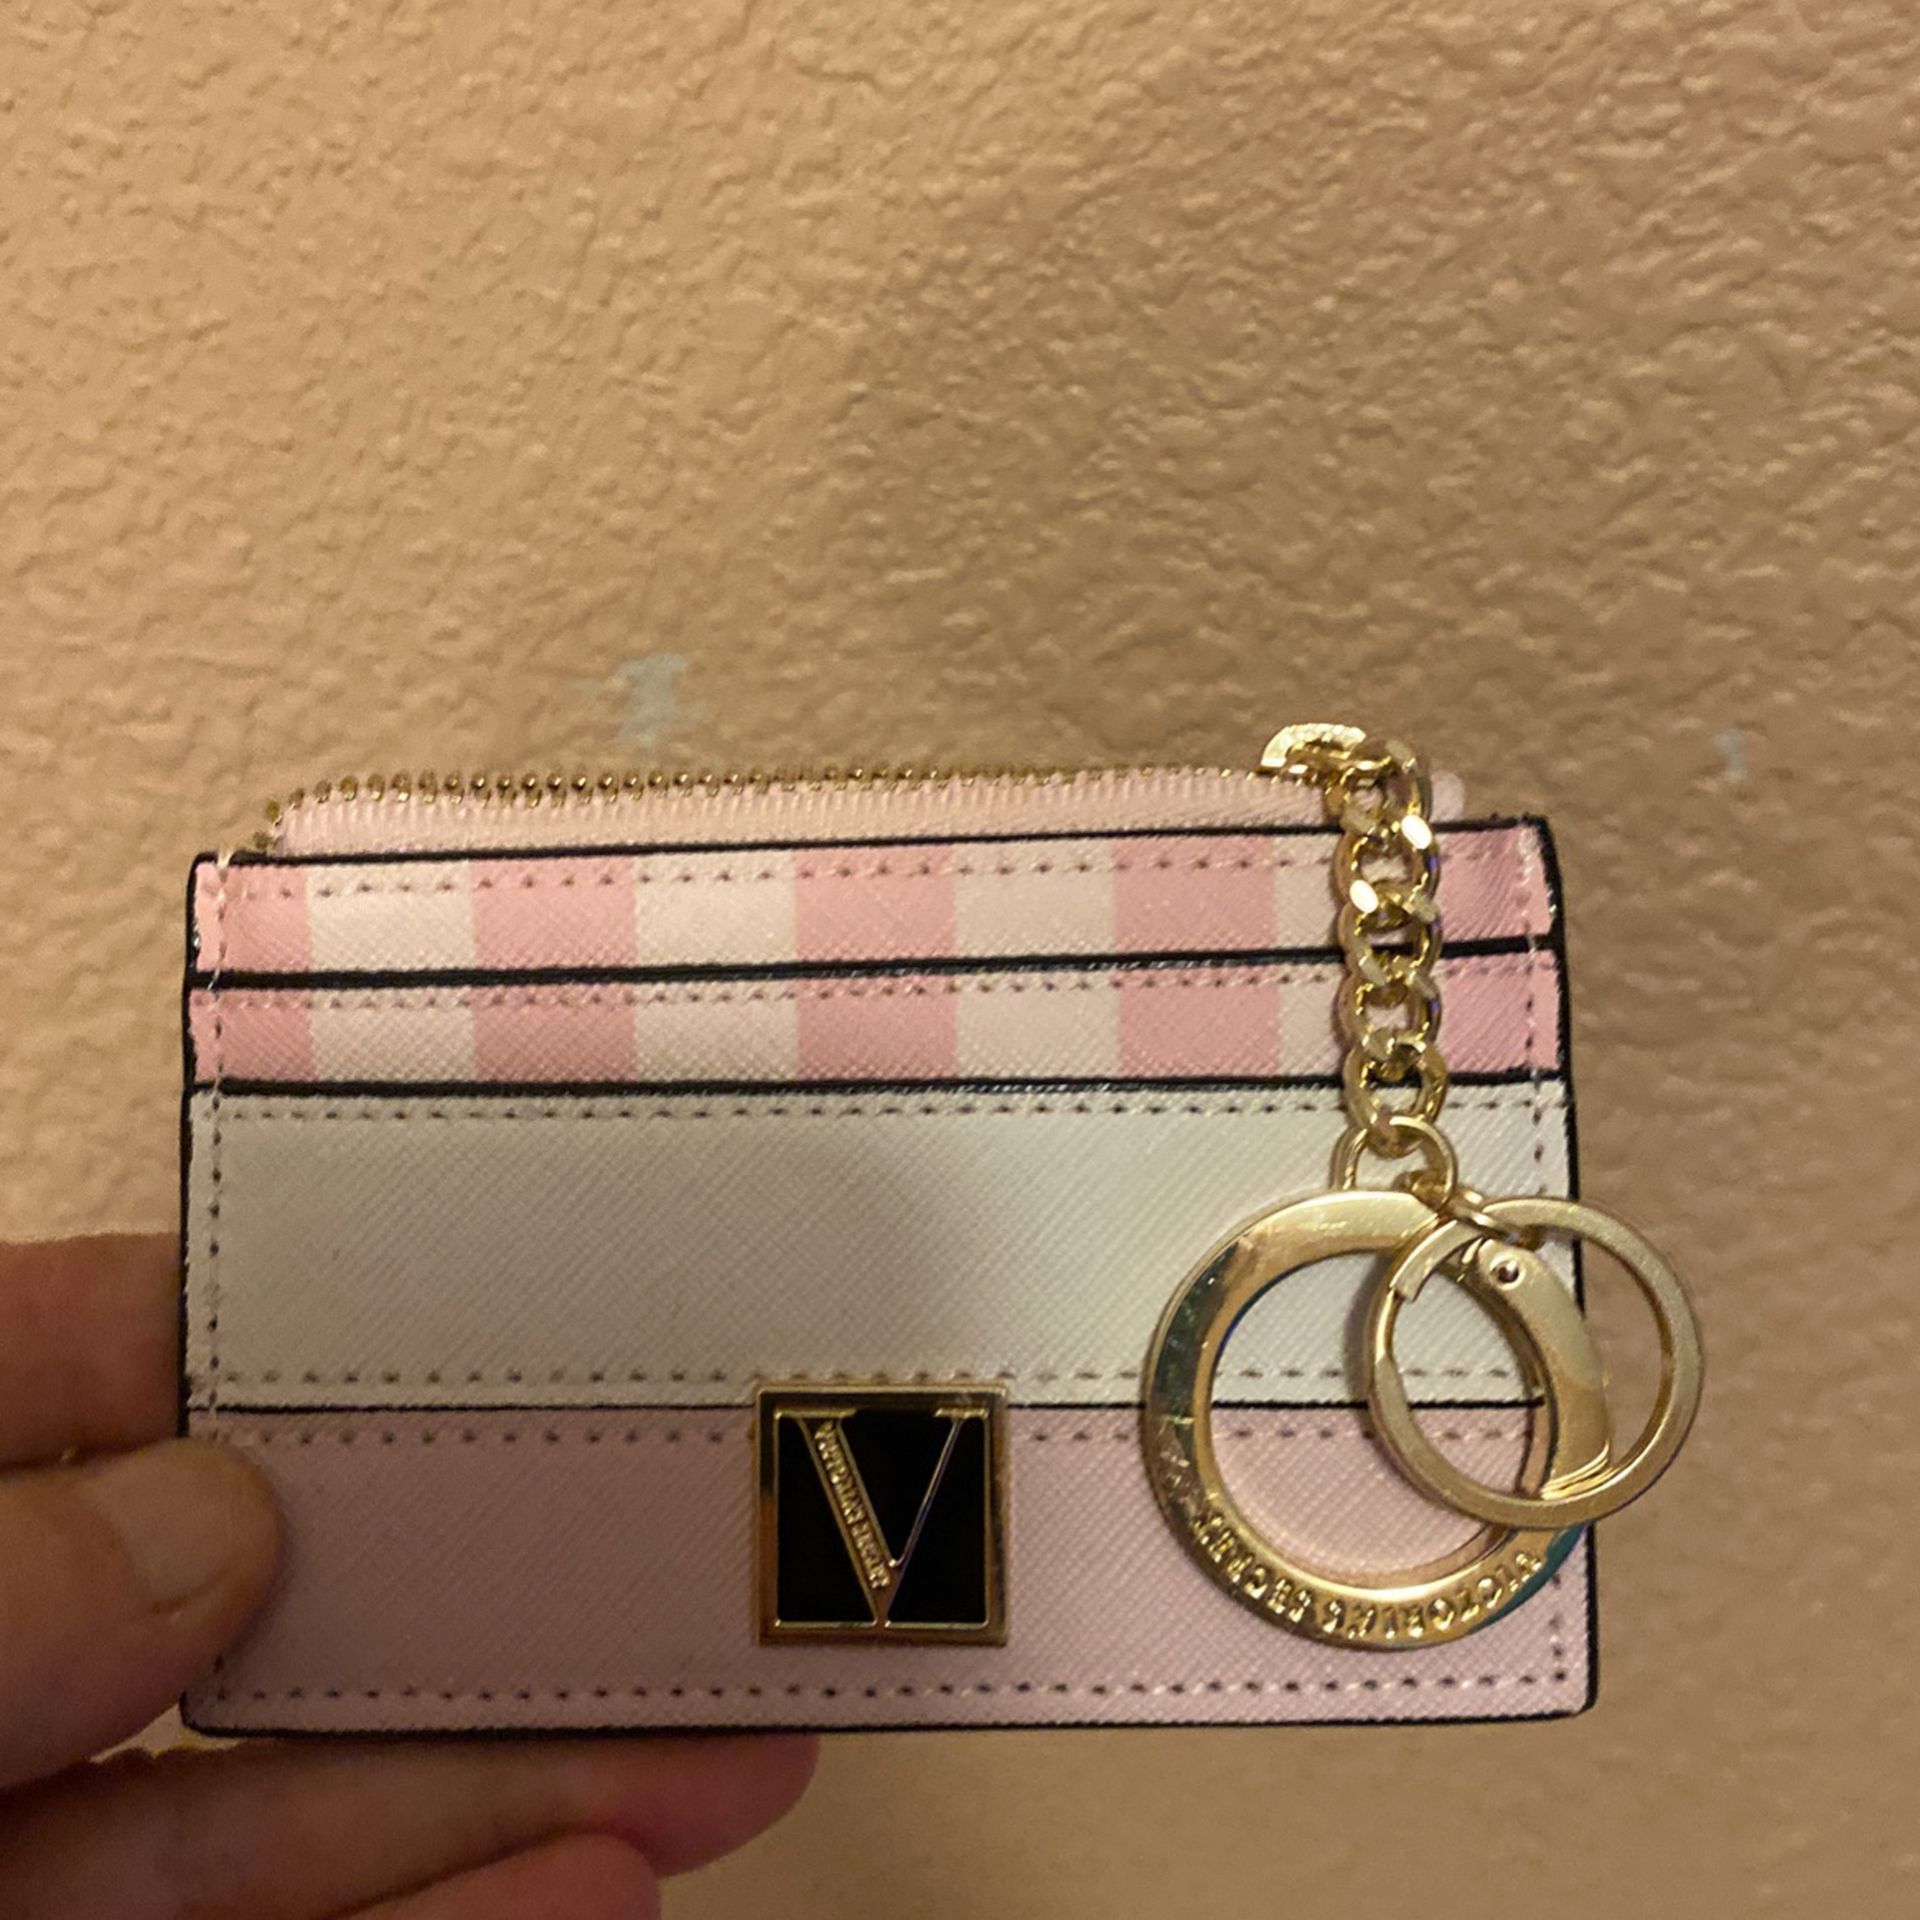 New Victoria Secret Leather Card Wallet With Money Pocket Keychain $6firm C My Other Wallets Ty